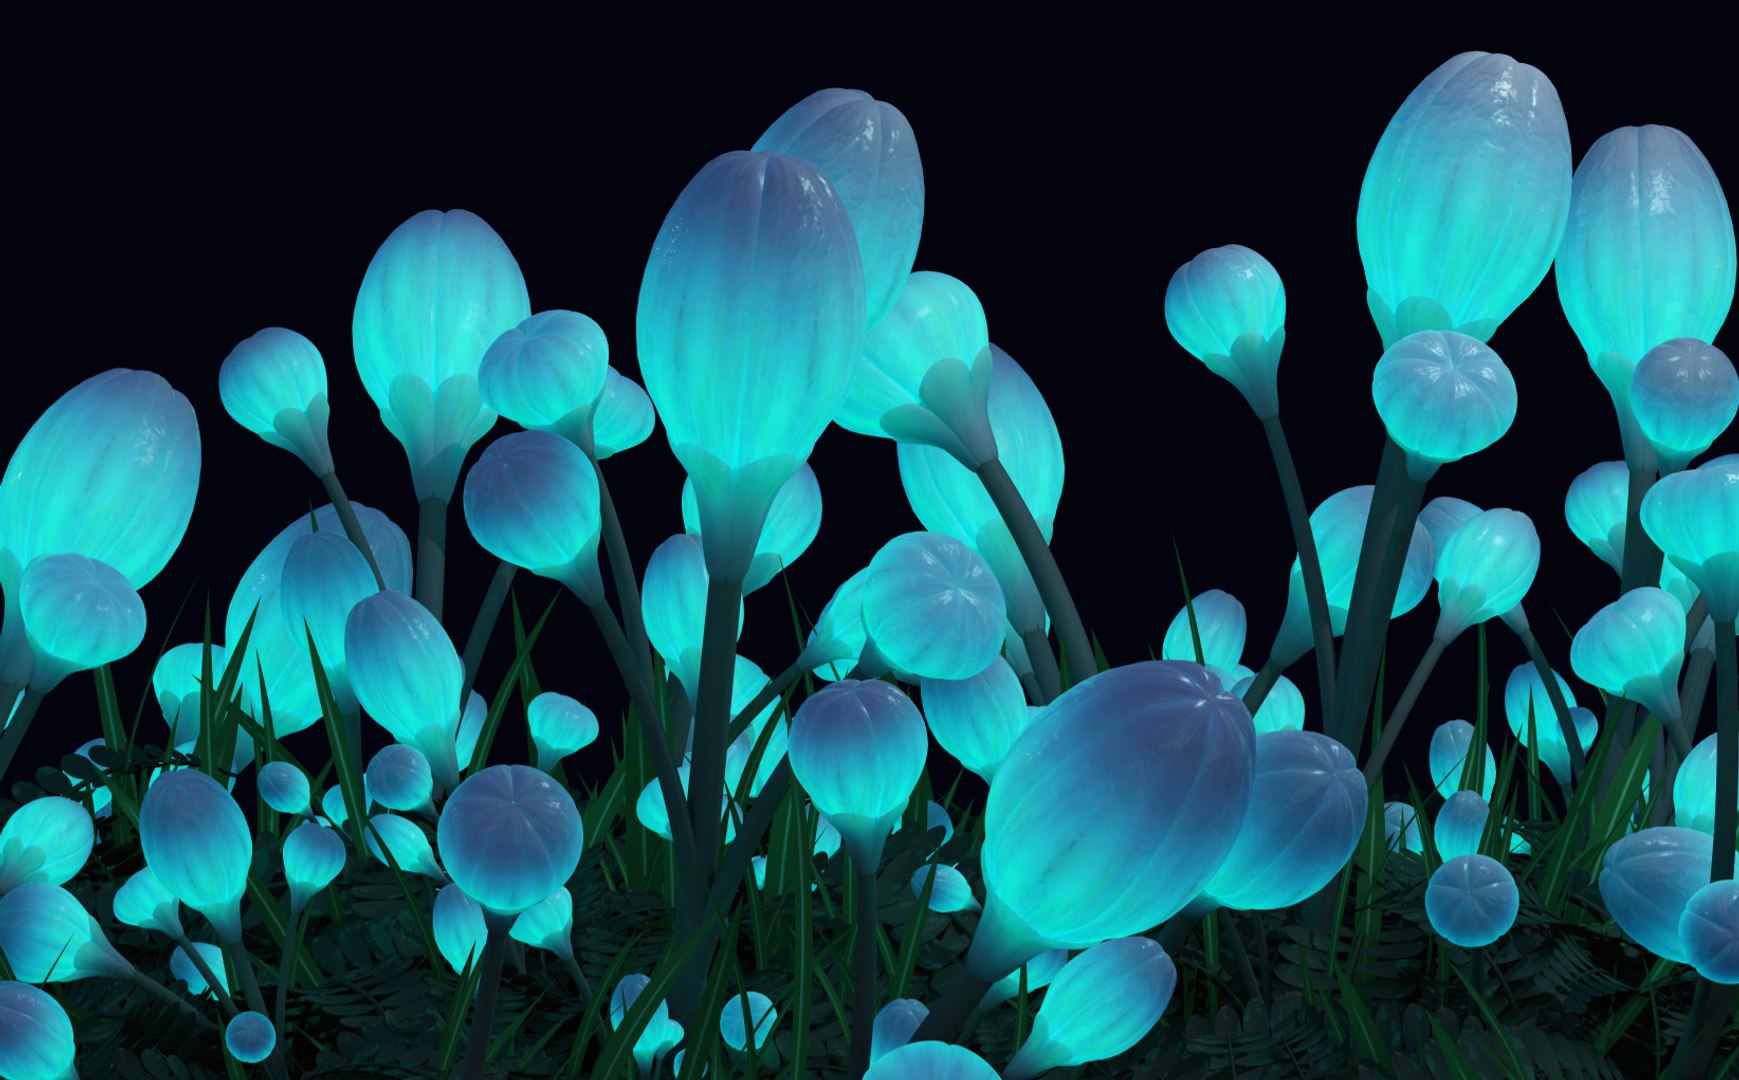 Starlight Avatar The Worlds First LightProducing Plant To Be Auctioned  By Bioglow  Greenhouse Grower